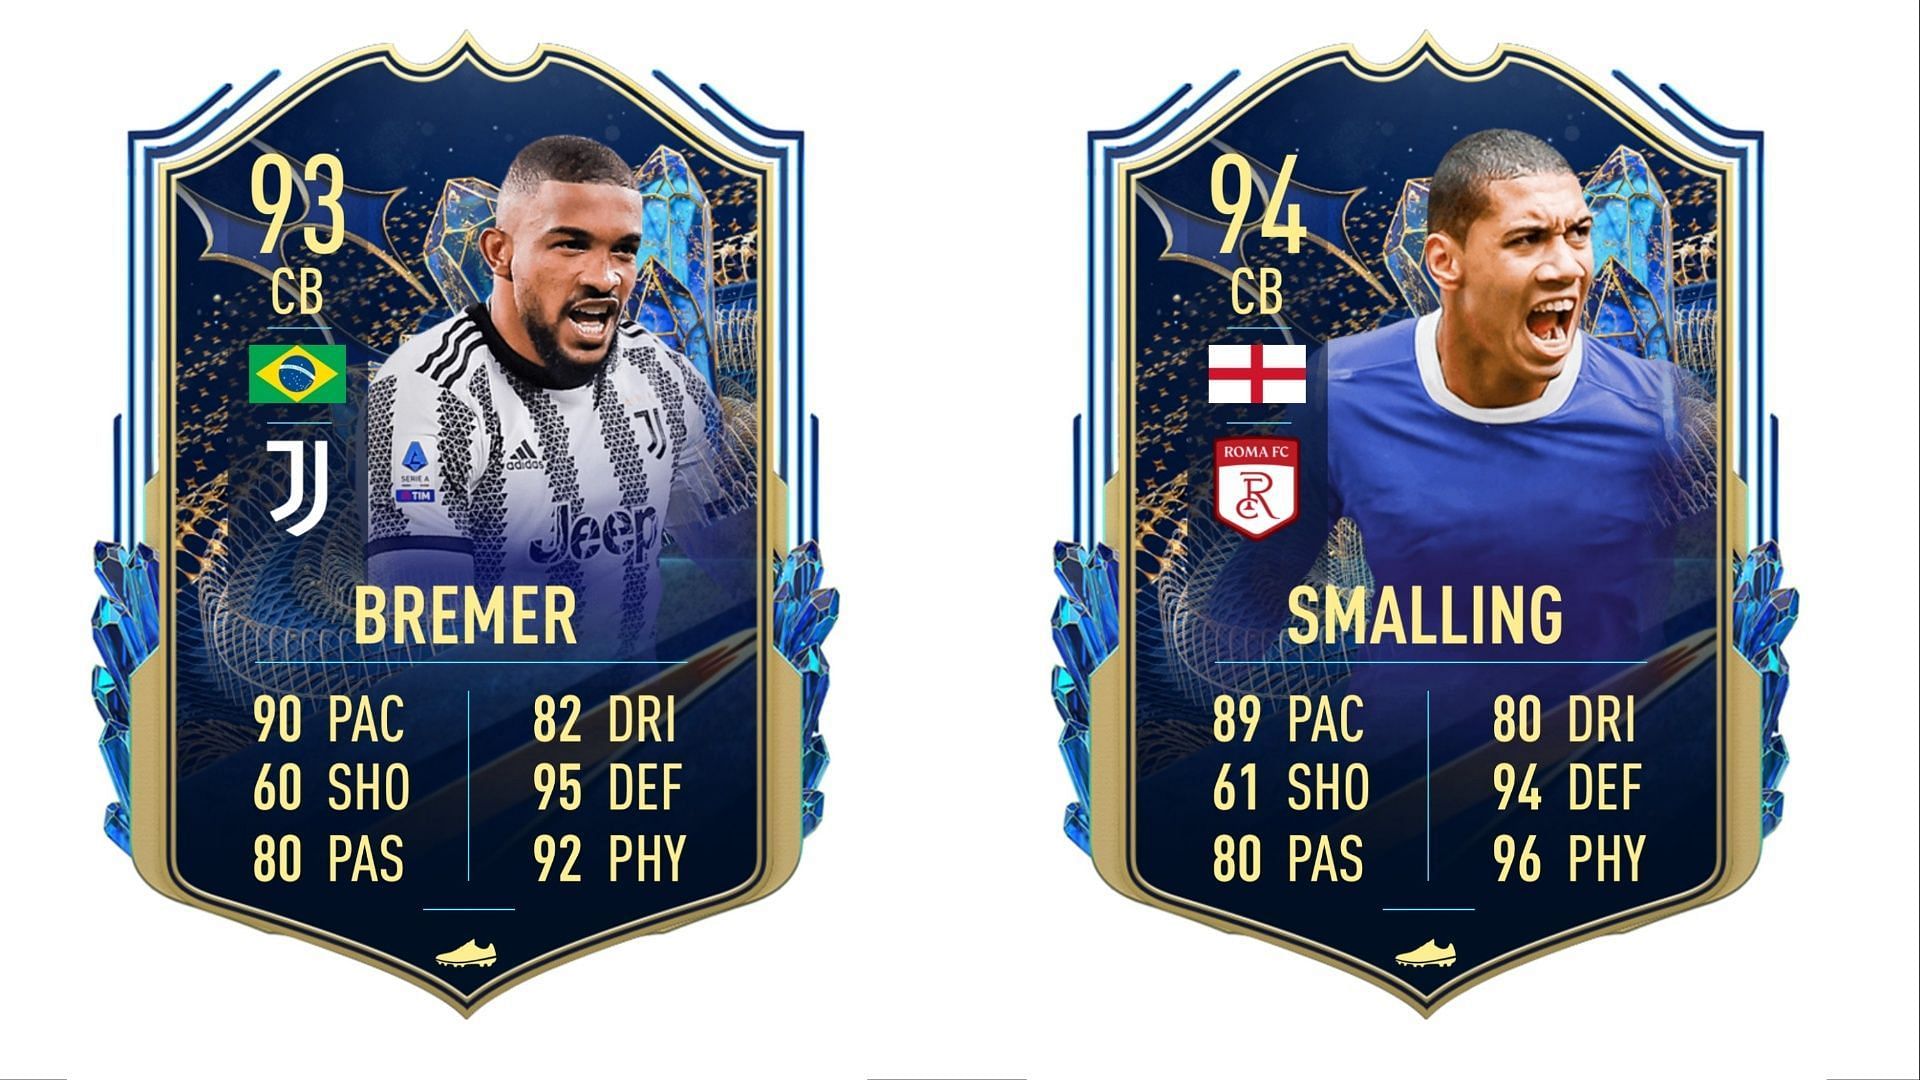 Smalling and Bremer&rsquo;s Serie A TOTS cards could be excellent additions for many FIFA 23 players (Images via Twitter/FIFA 23 leaks)